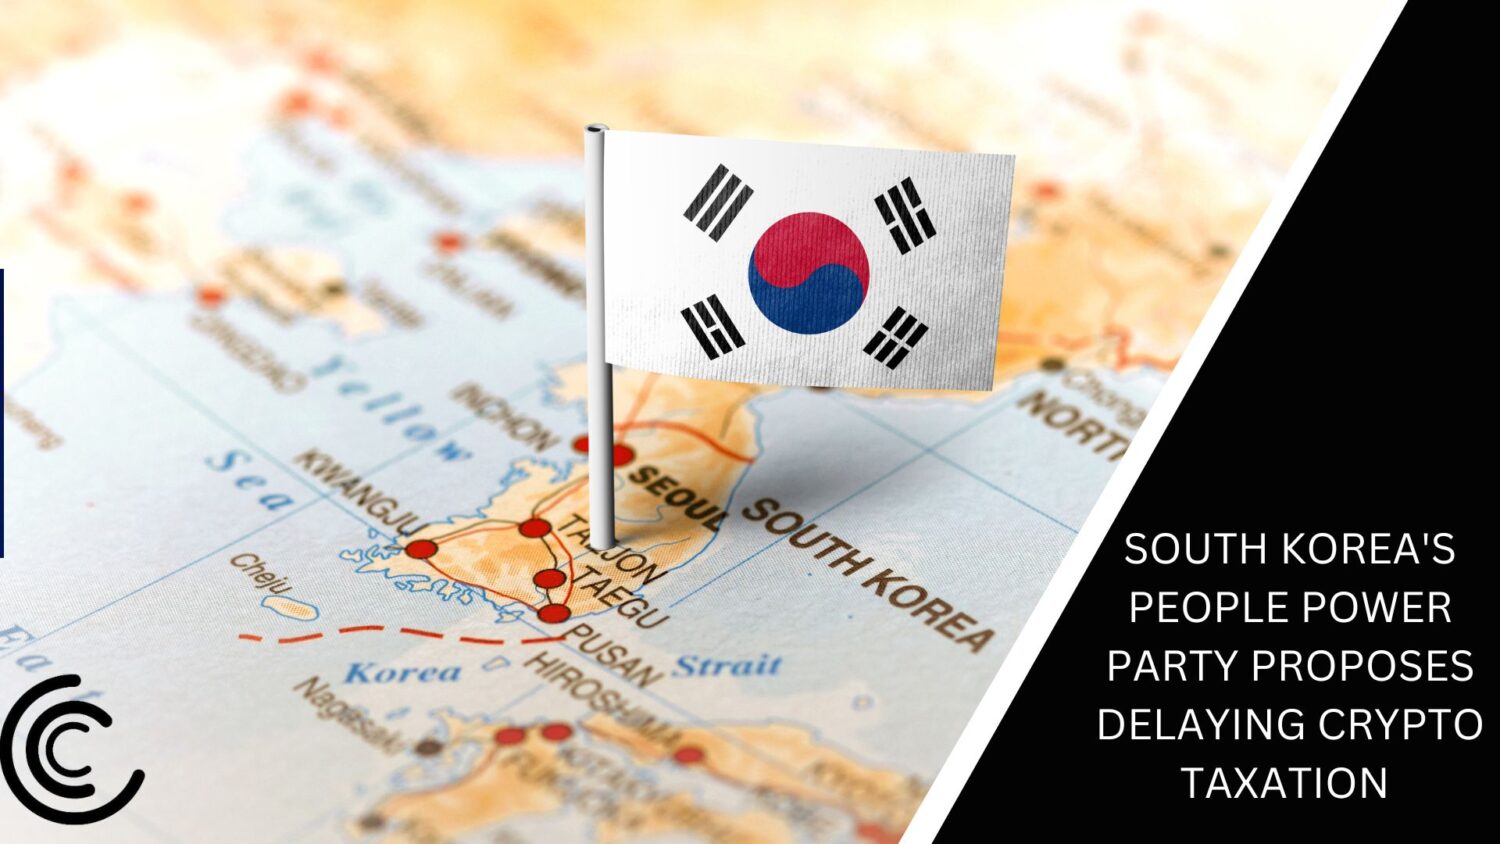 South Korea'S People Power Party Proposes Delaying Crypto Taxation 